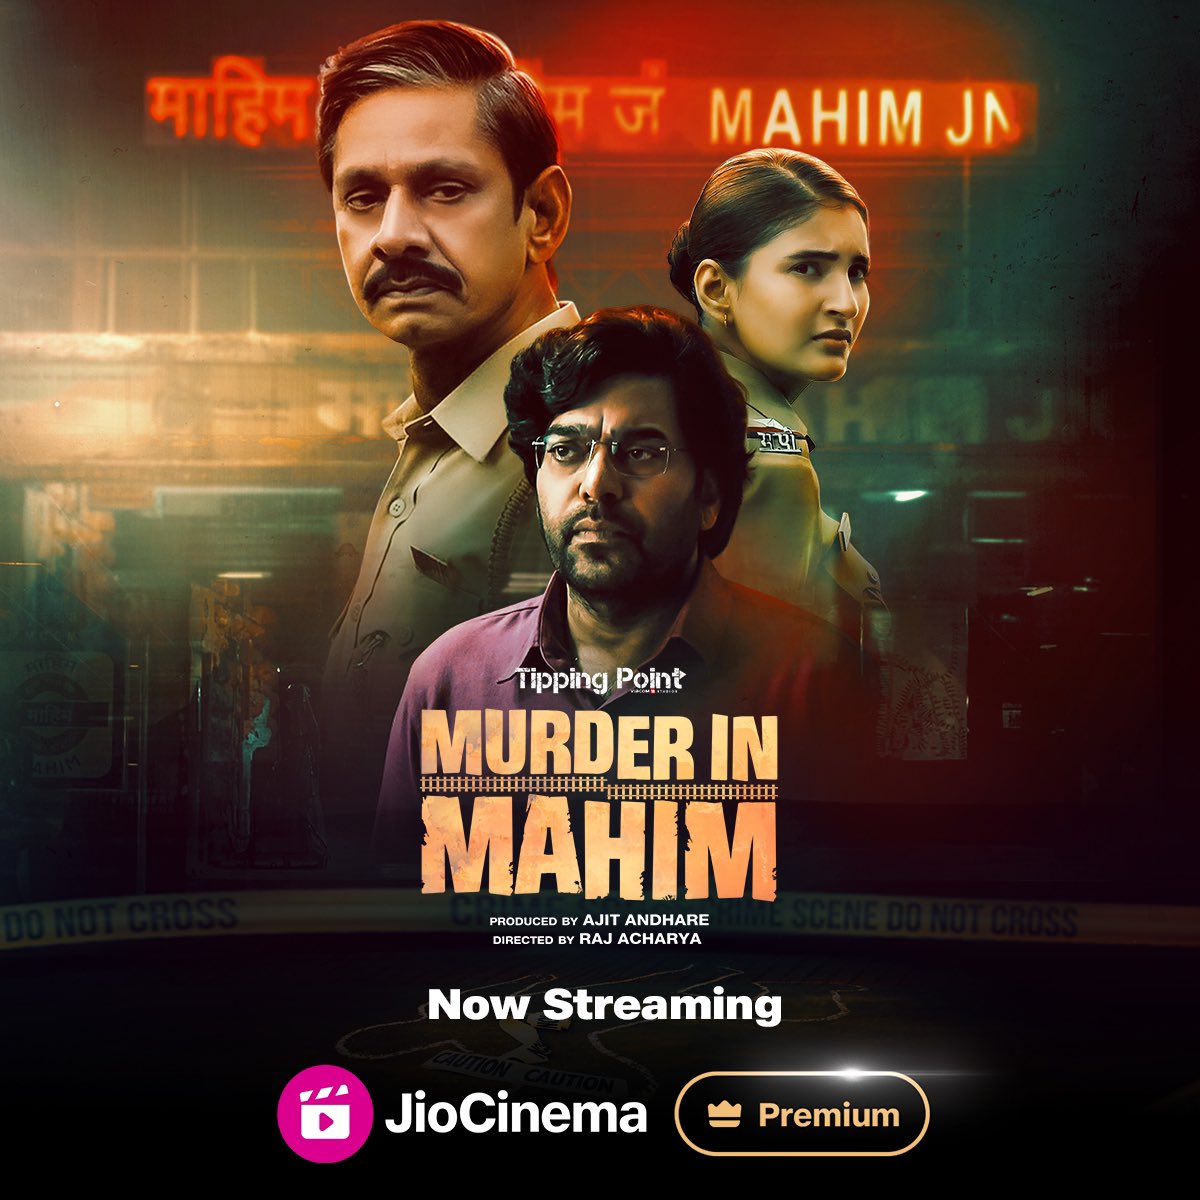 Suspense. Intrigue. Unpredictable… #MurderInMahim completely immerses you in a complicated case, with the characters keeping you on the edge, throwing plenty of surprises as the plot thickens. One of the strengths of #MurderInMahim is the razor-sharp writing, the unexpected